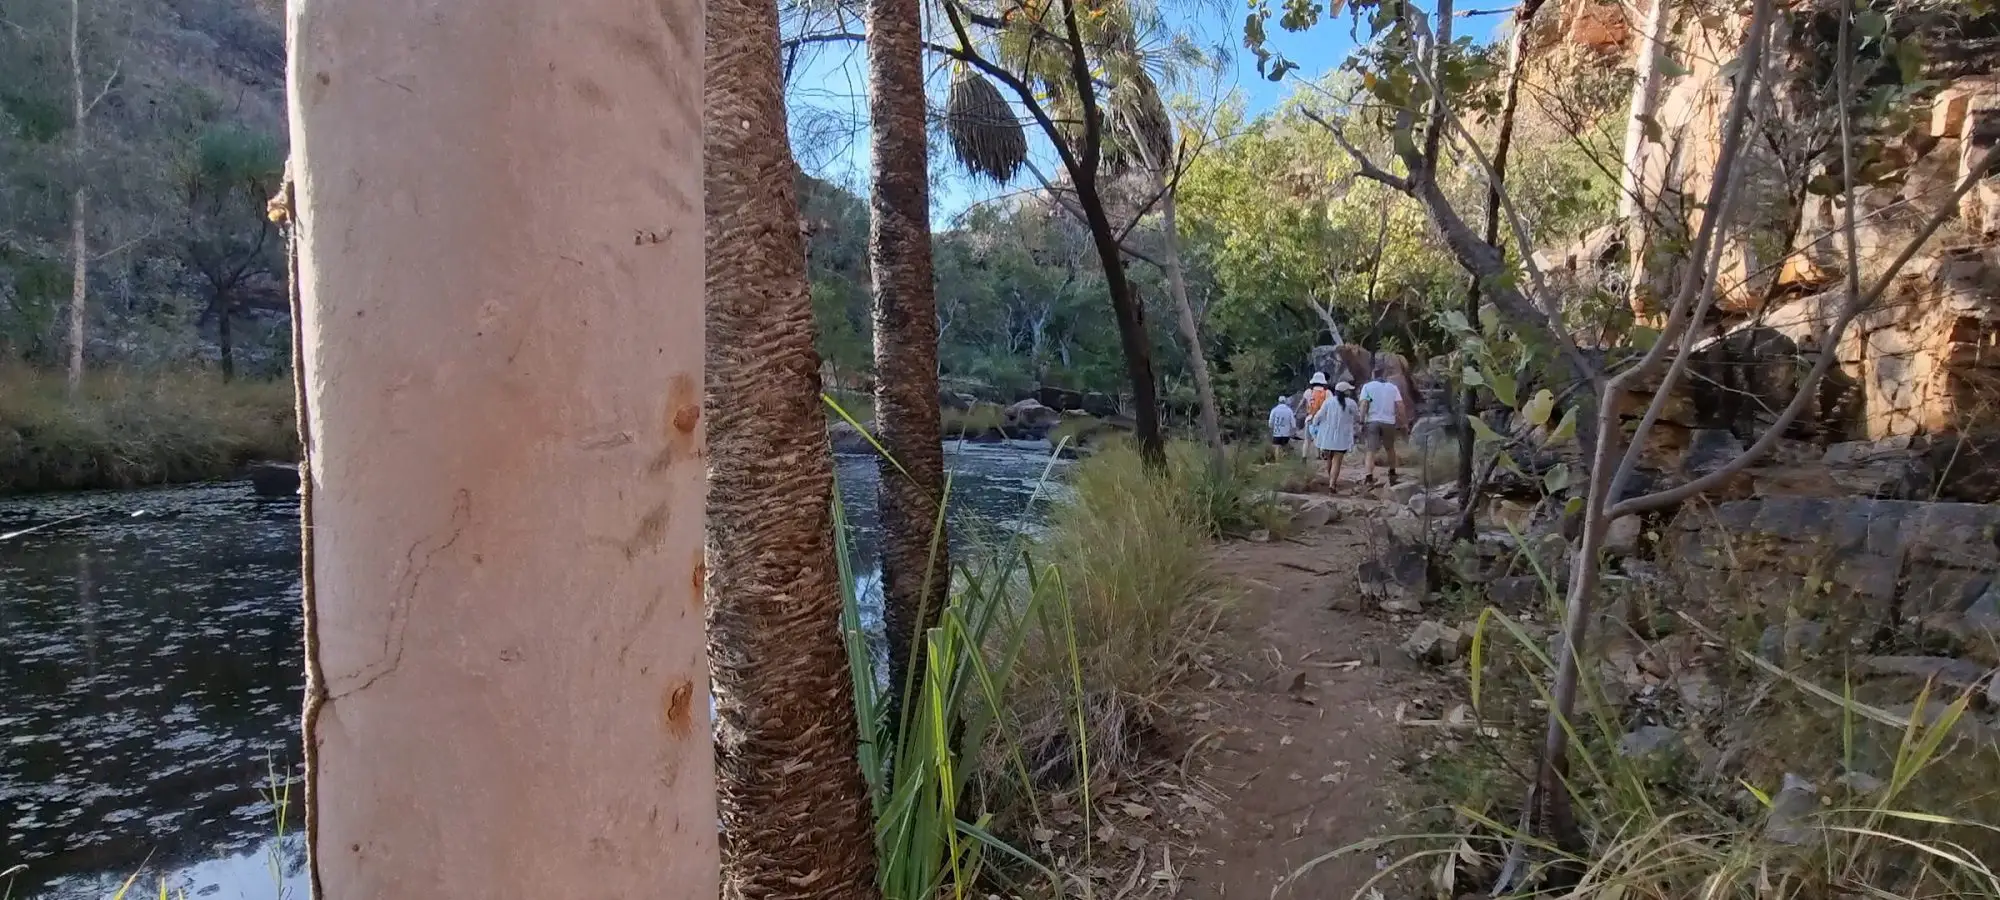 walking alongside a river at Adcock Gorge